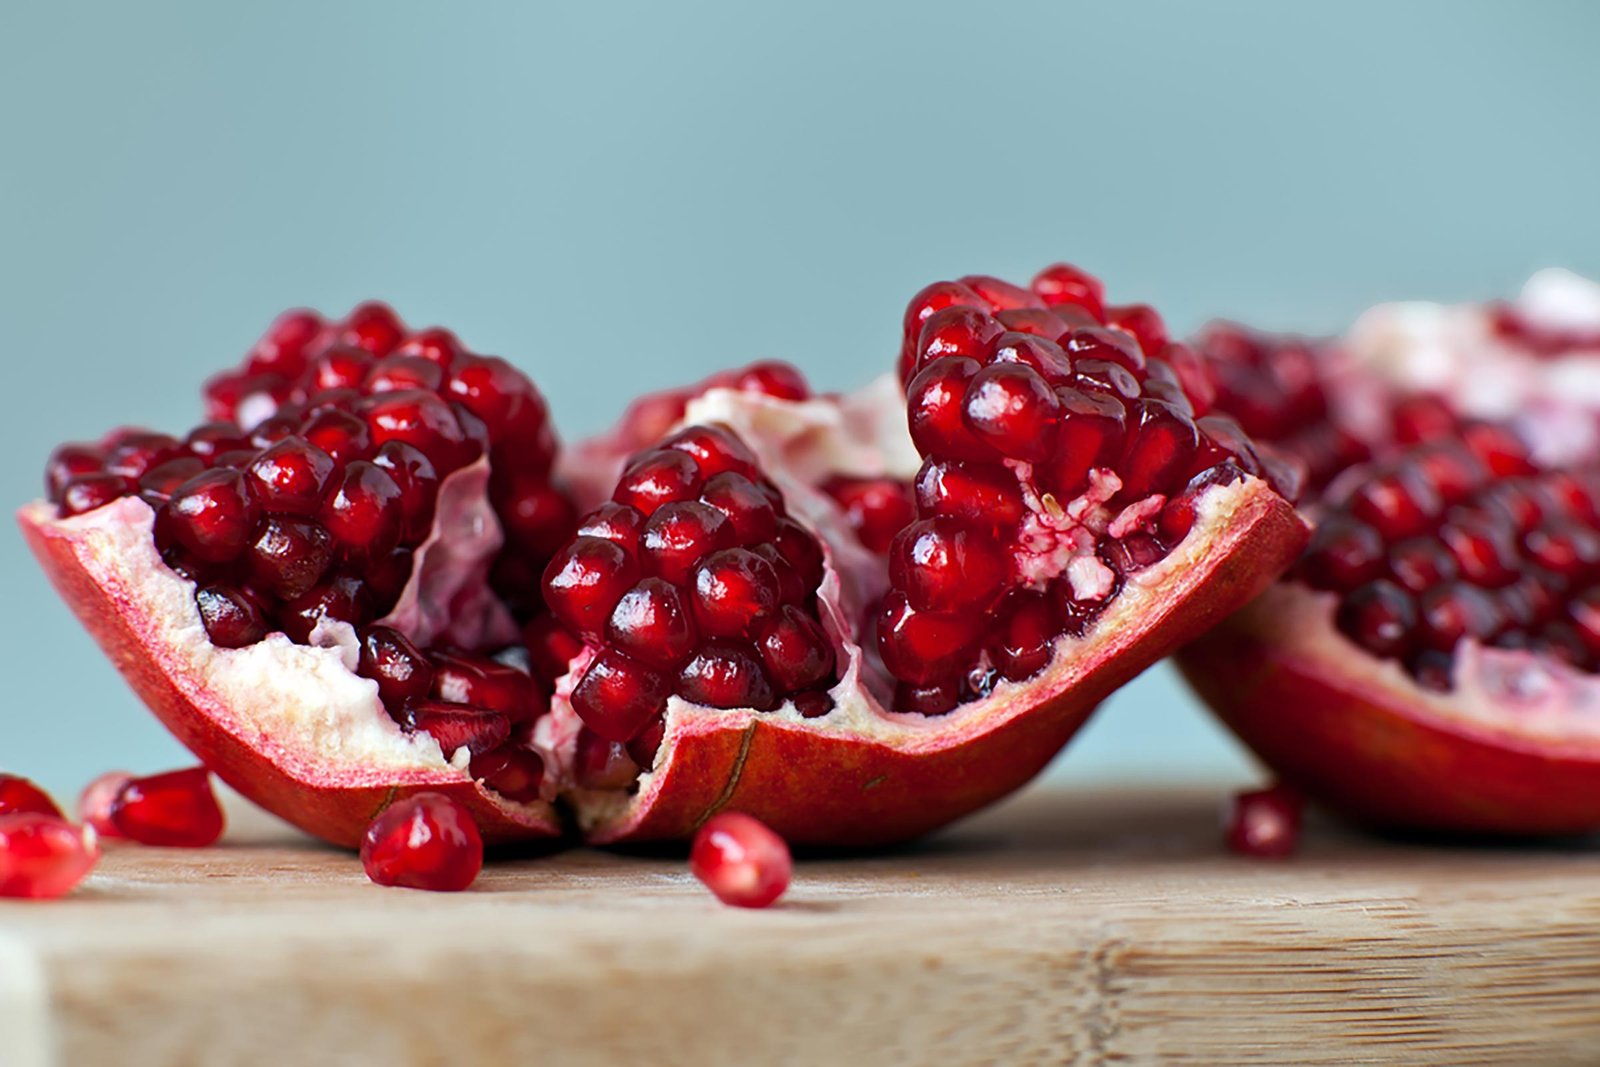 In Greece, a traditional housewarming gift is a pomegranate placed under or near the home altar of the house in order to bring good luck, fertility and abundance.